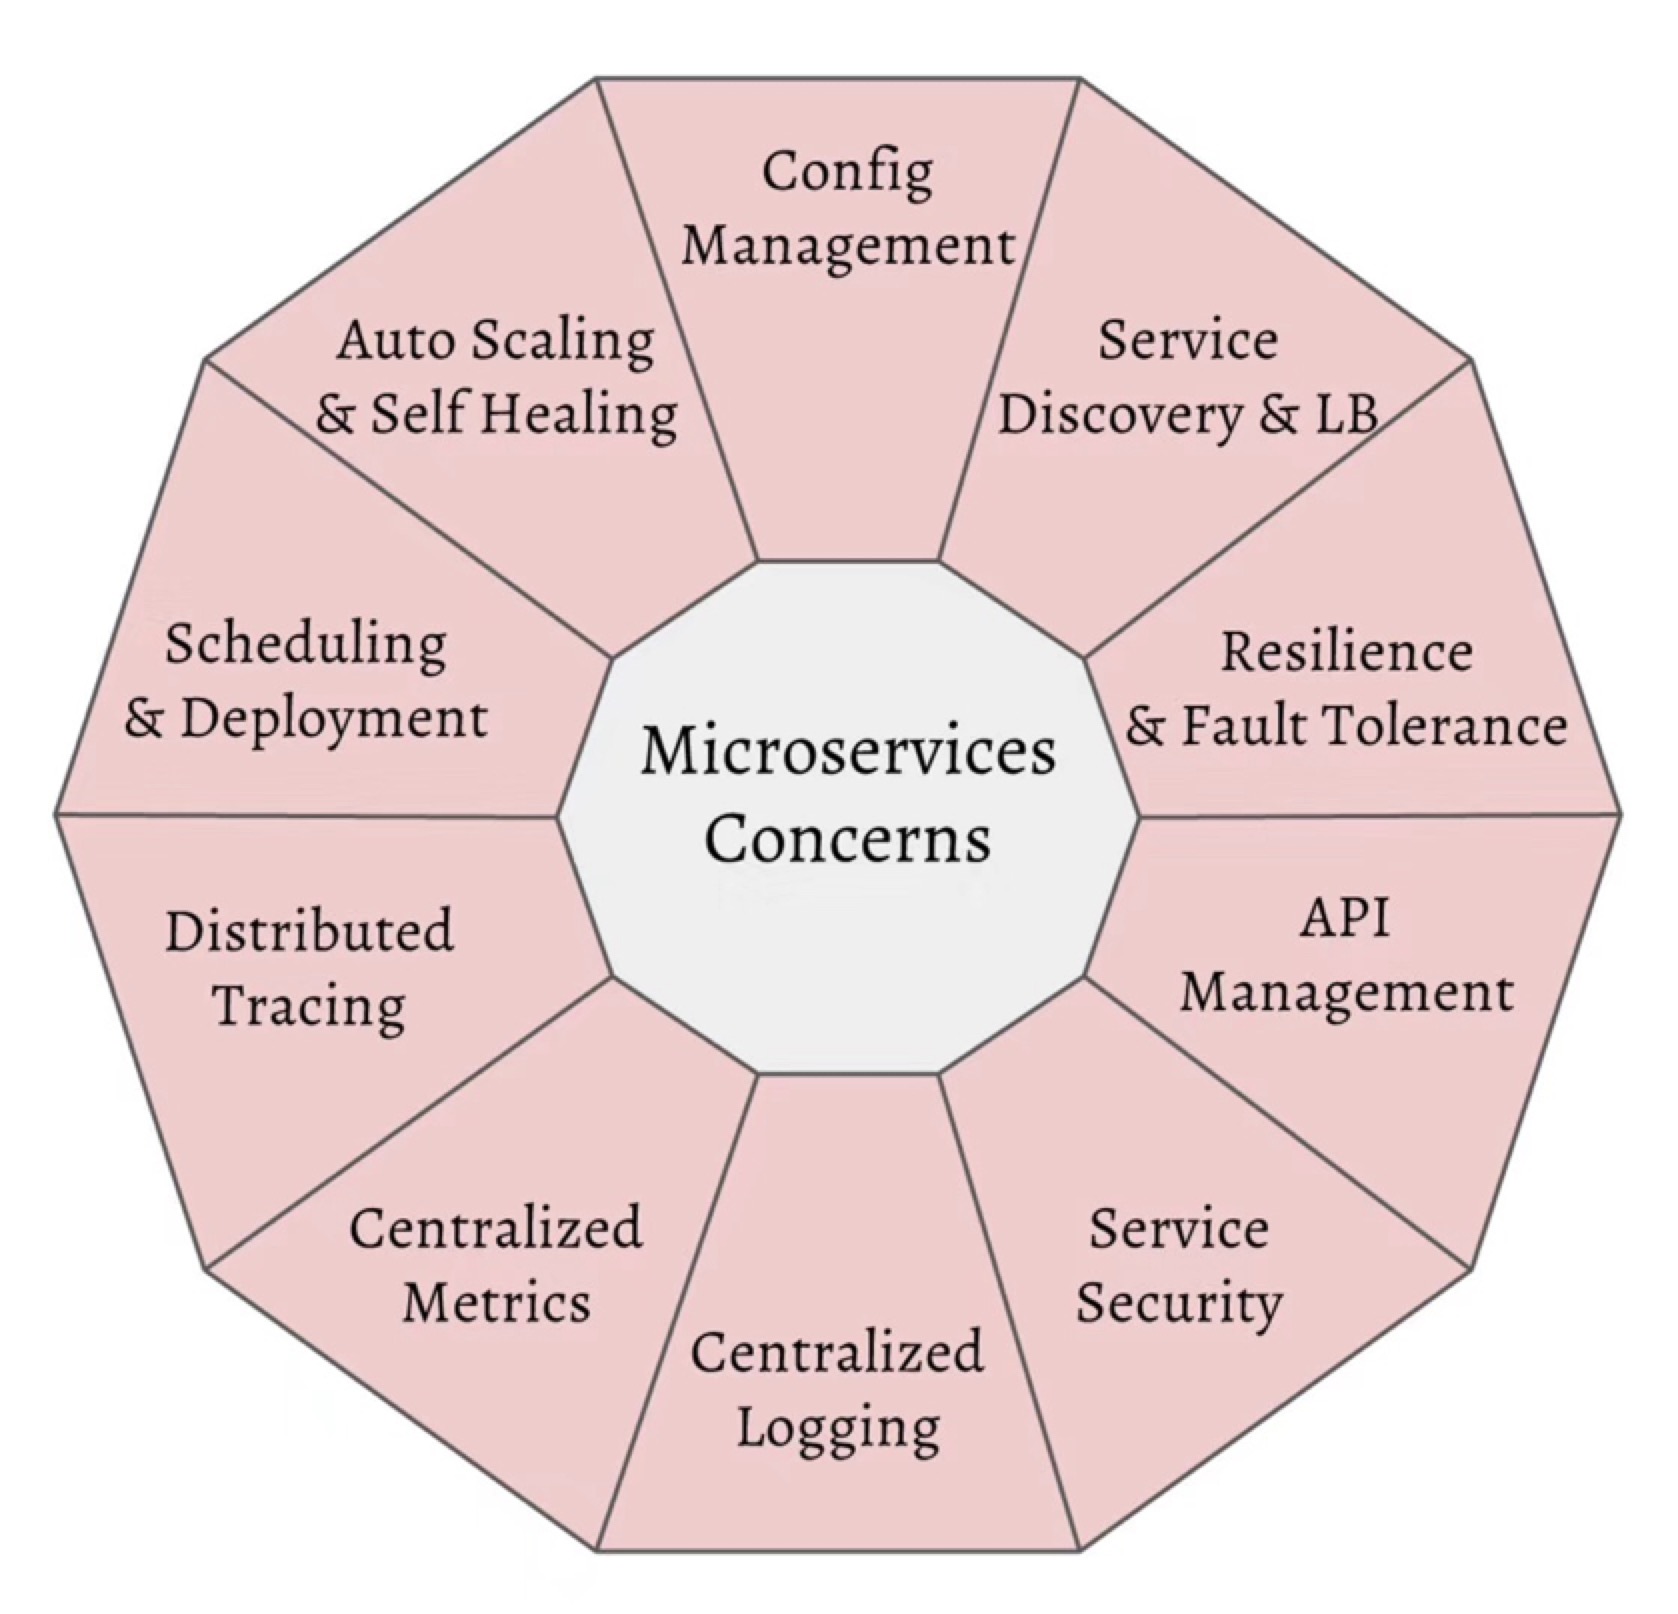 Microservices concerns